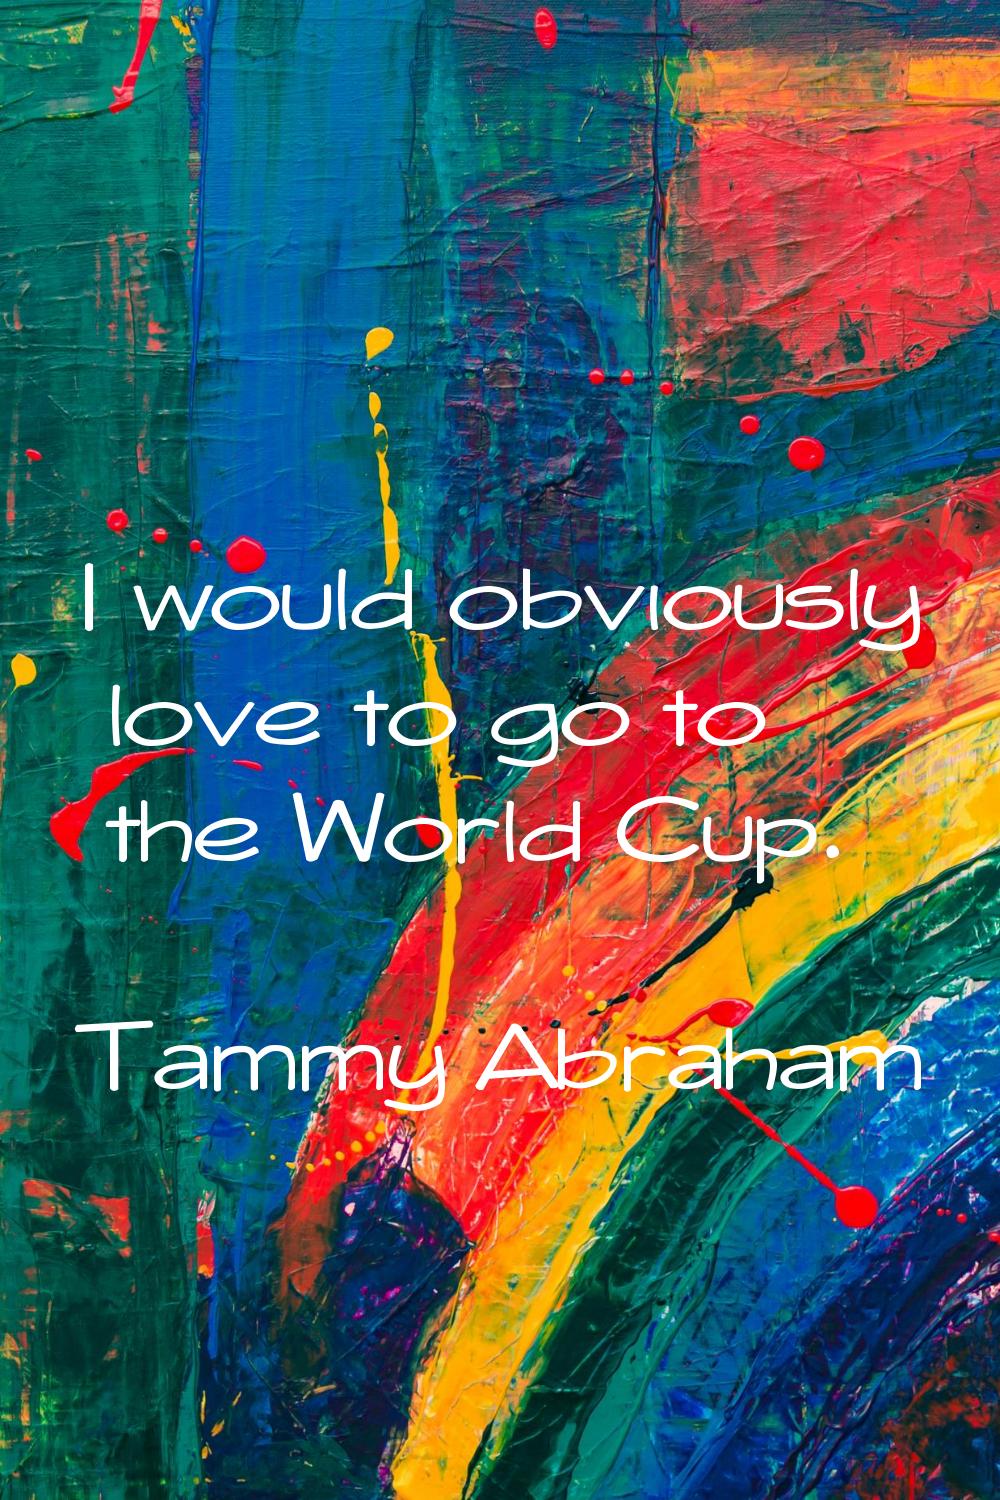 I would obviously love to go to the World Cup.